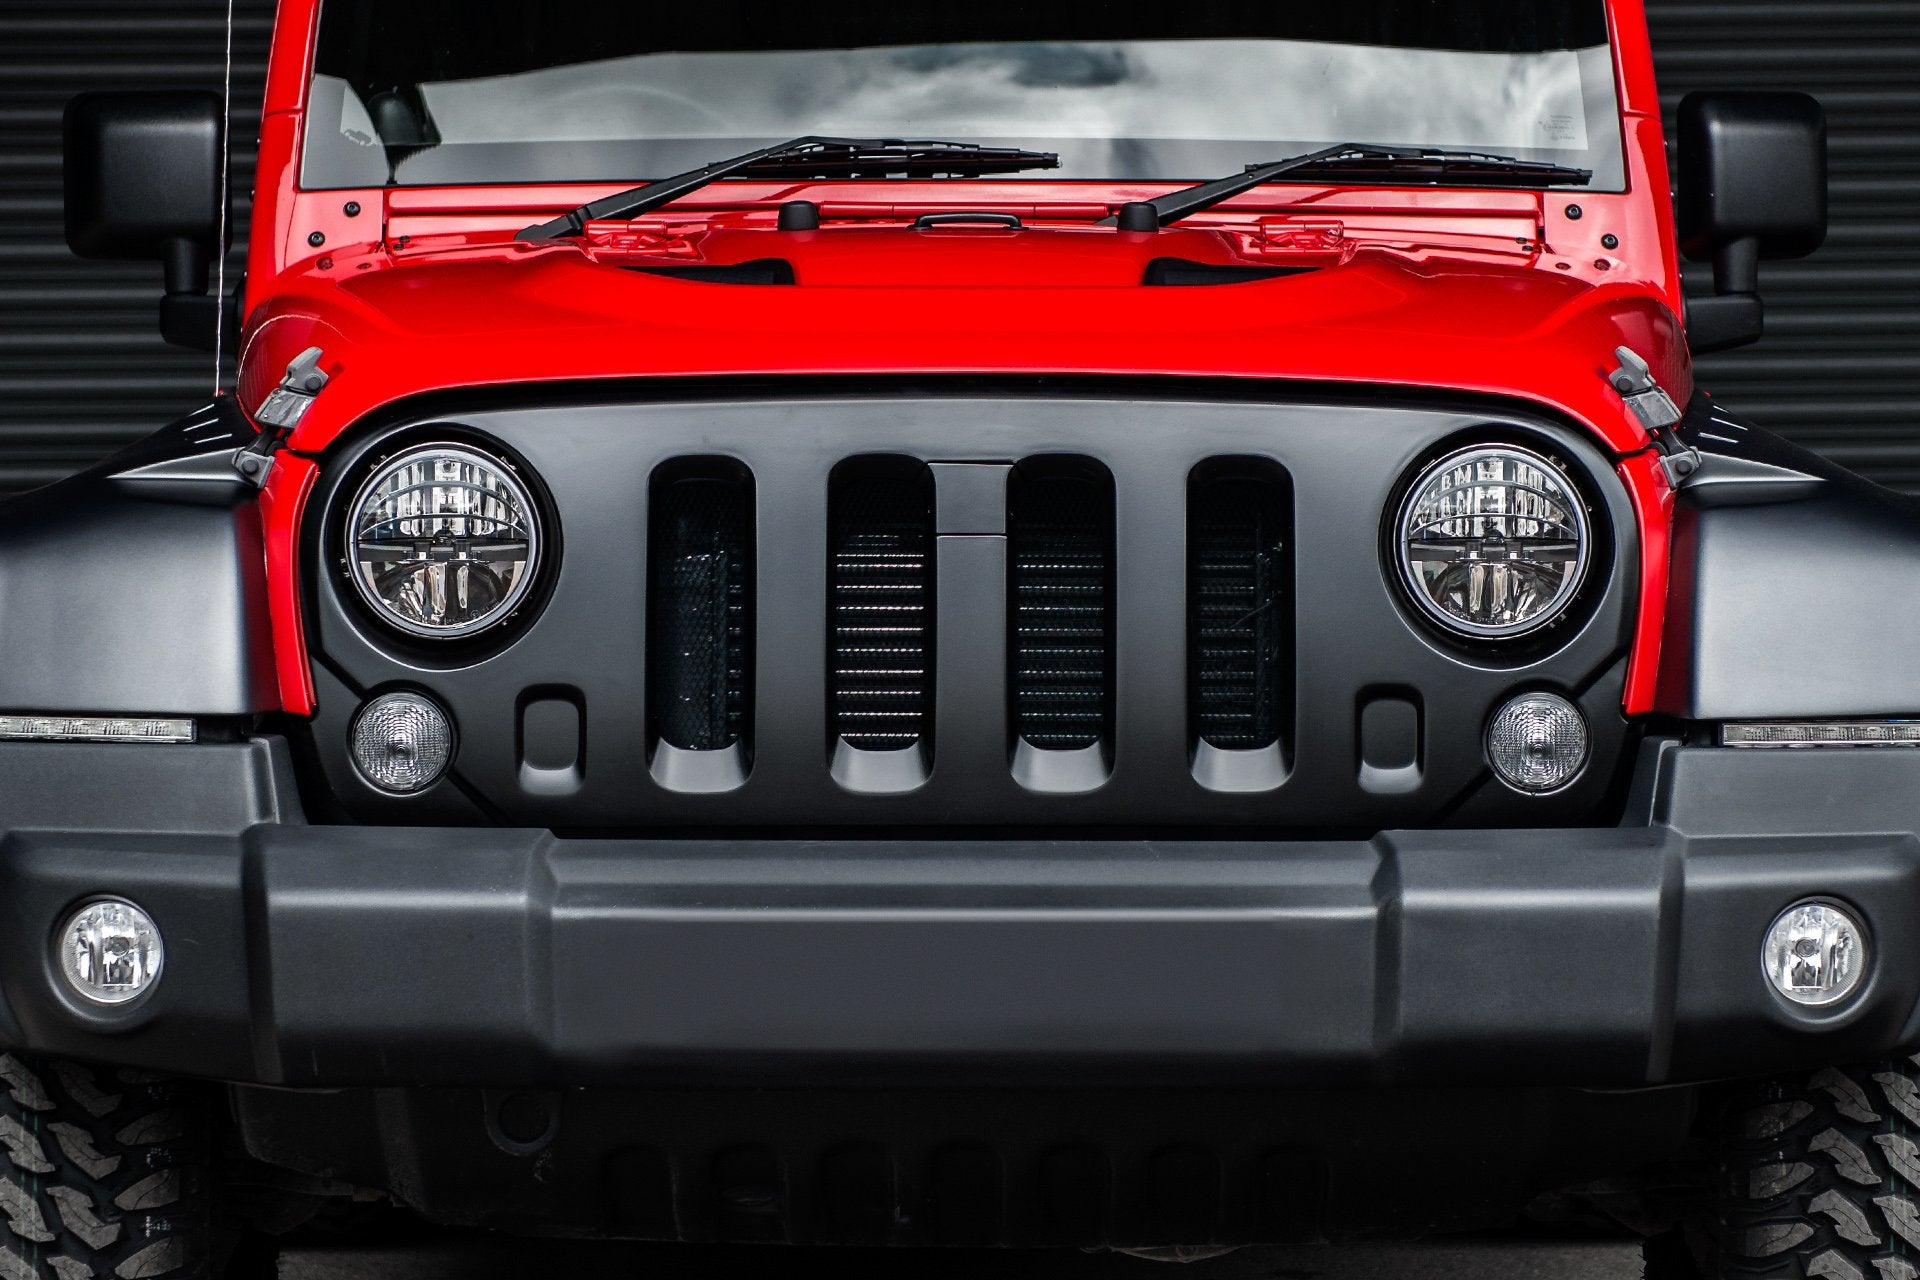 Jeep Wrangler | 4 Slot Front Grille | Chelsea Truck Co - Project Kahn